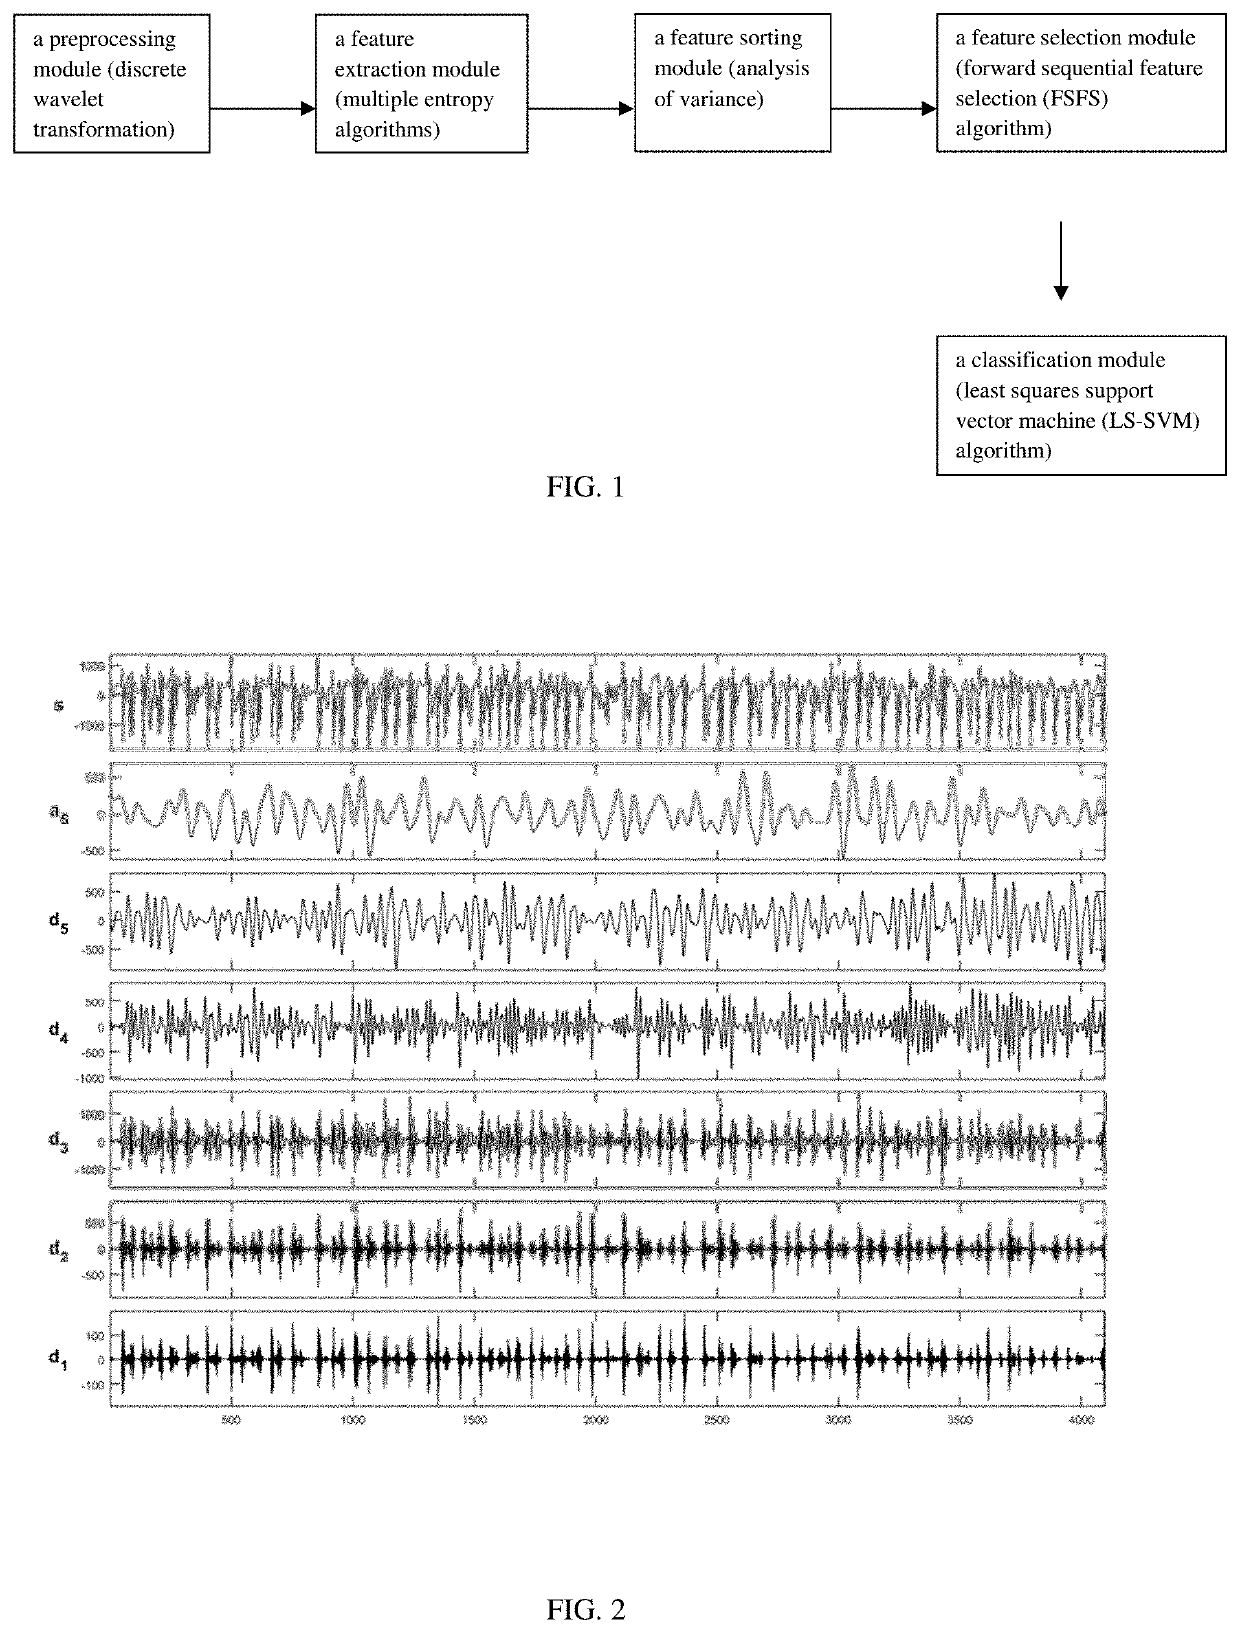 Classification system of epileptic eeg signals based on non-linear dynamics features